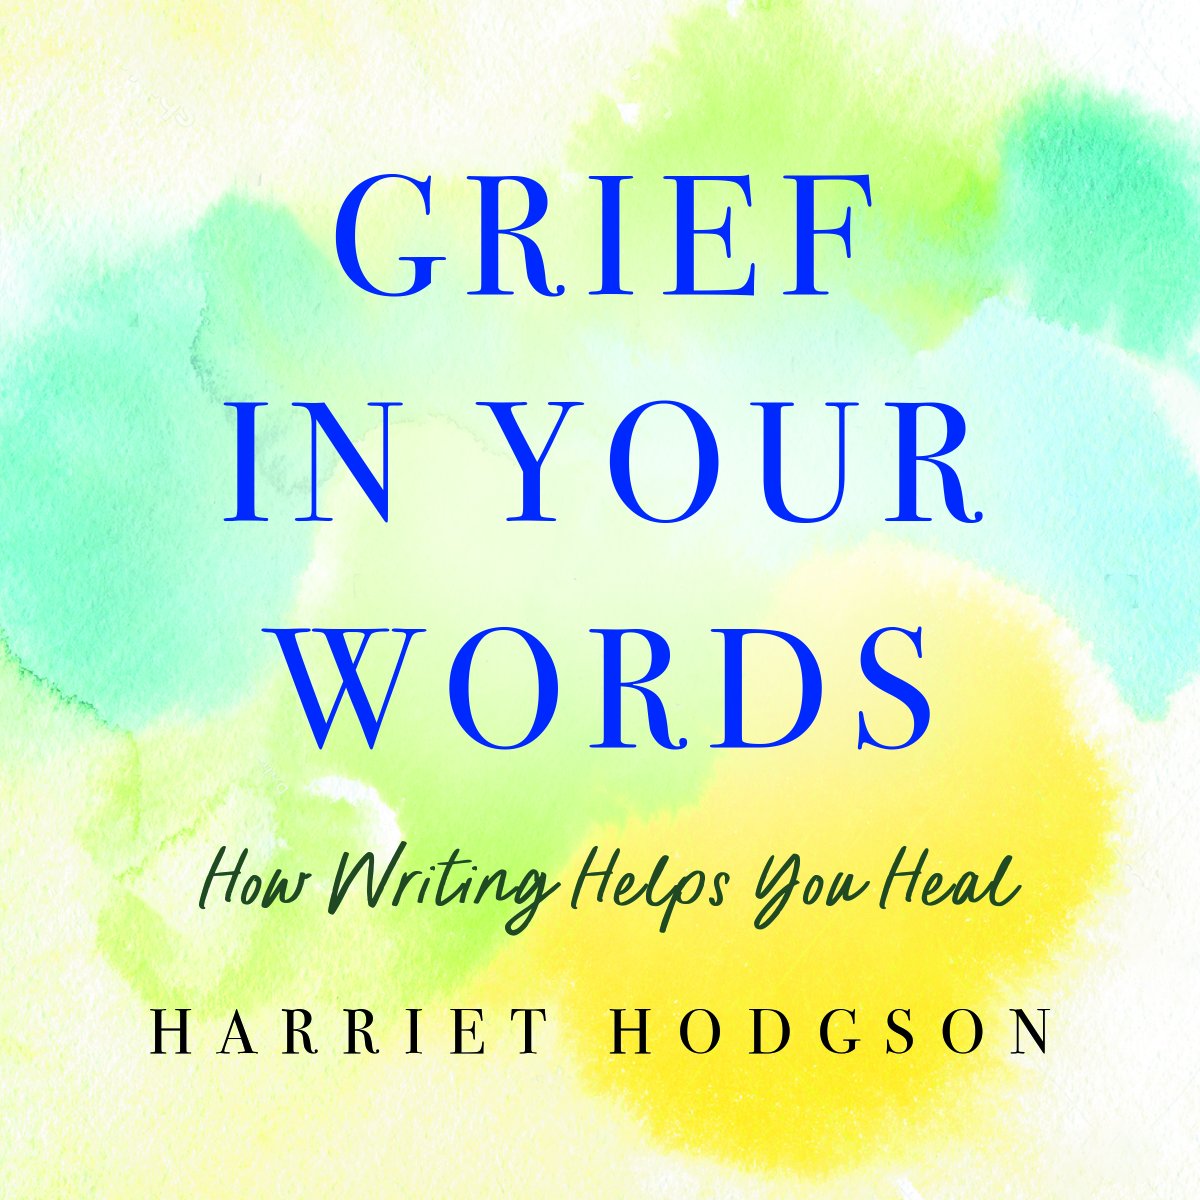 This book won the Firebird Book Award, grief category. I'm grateful and pleased.